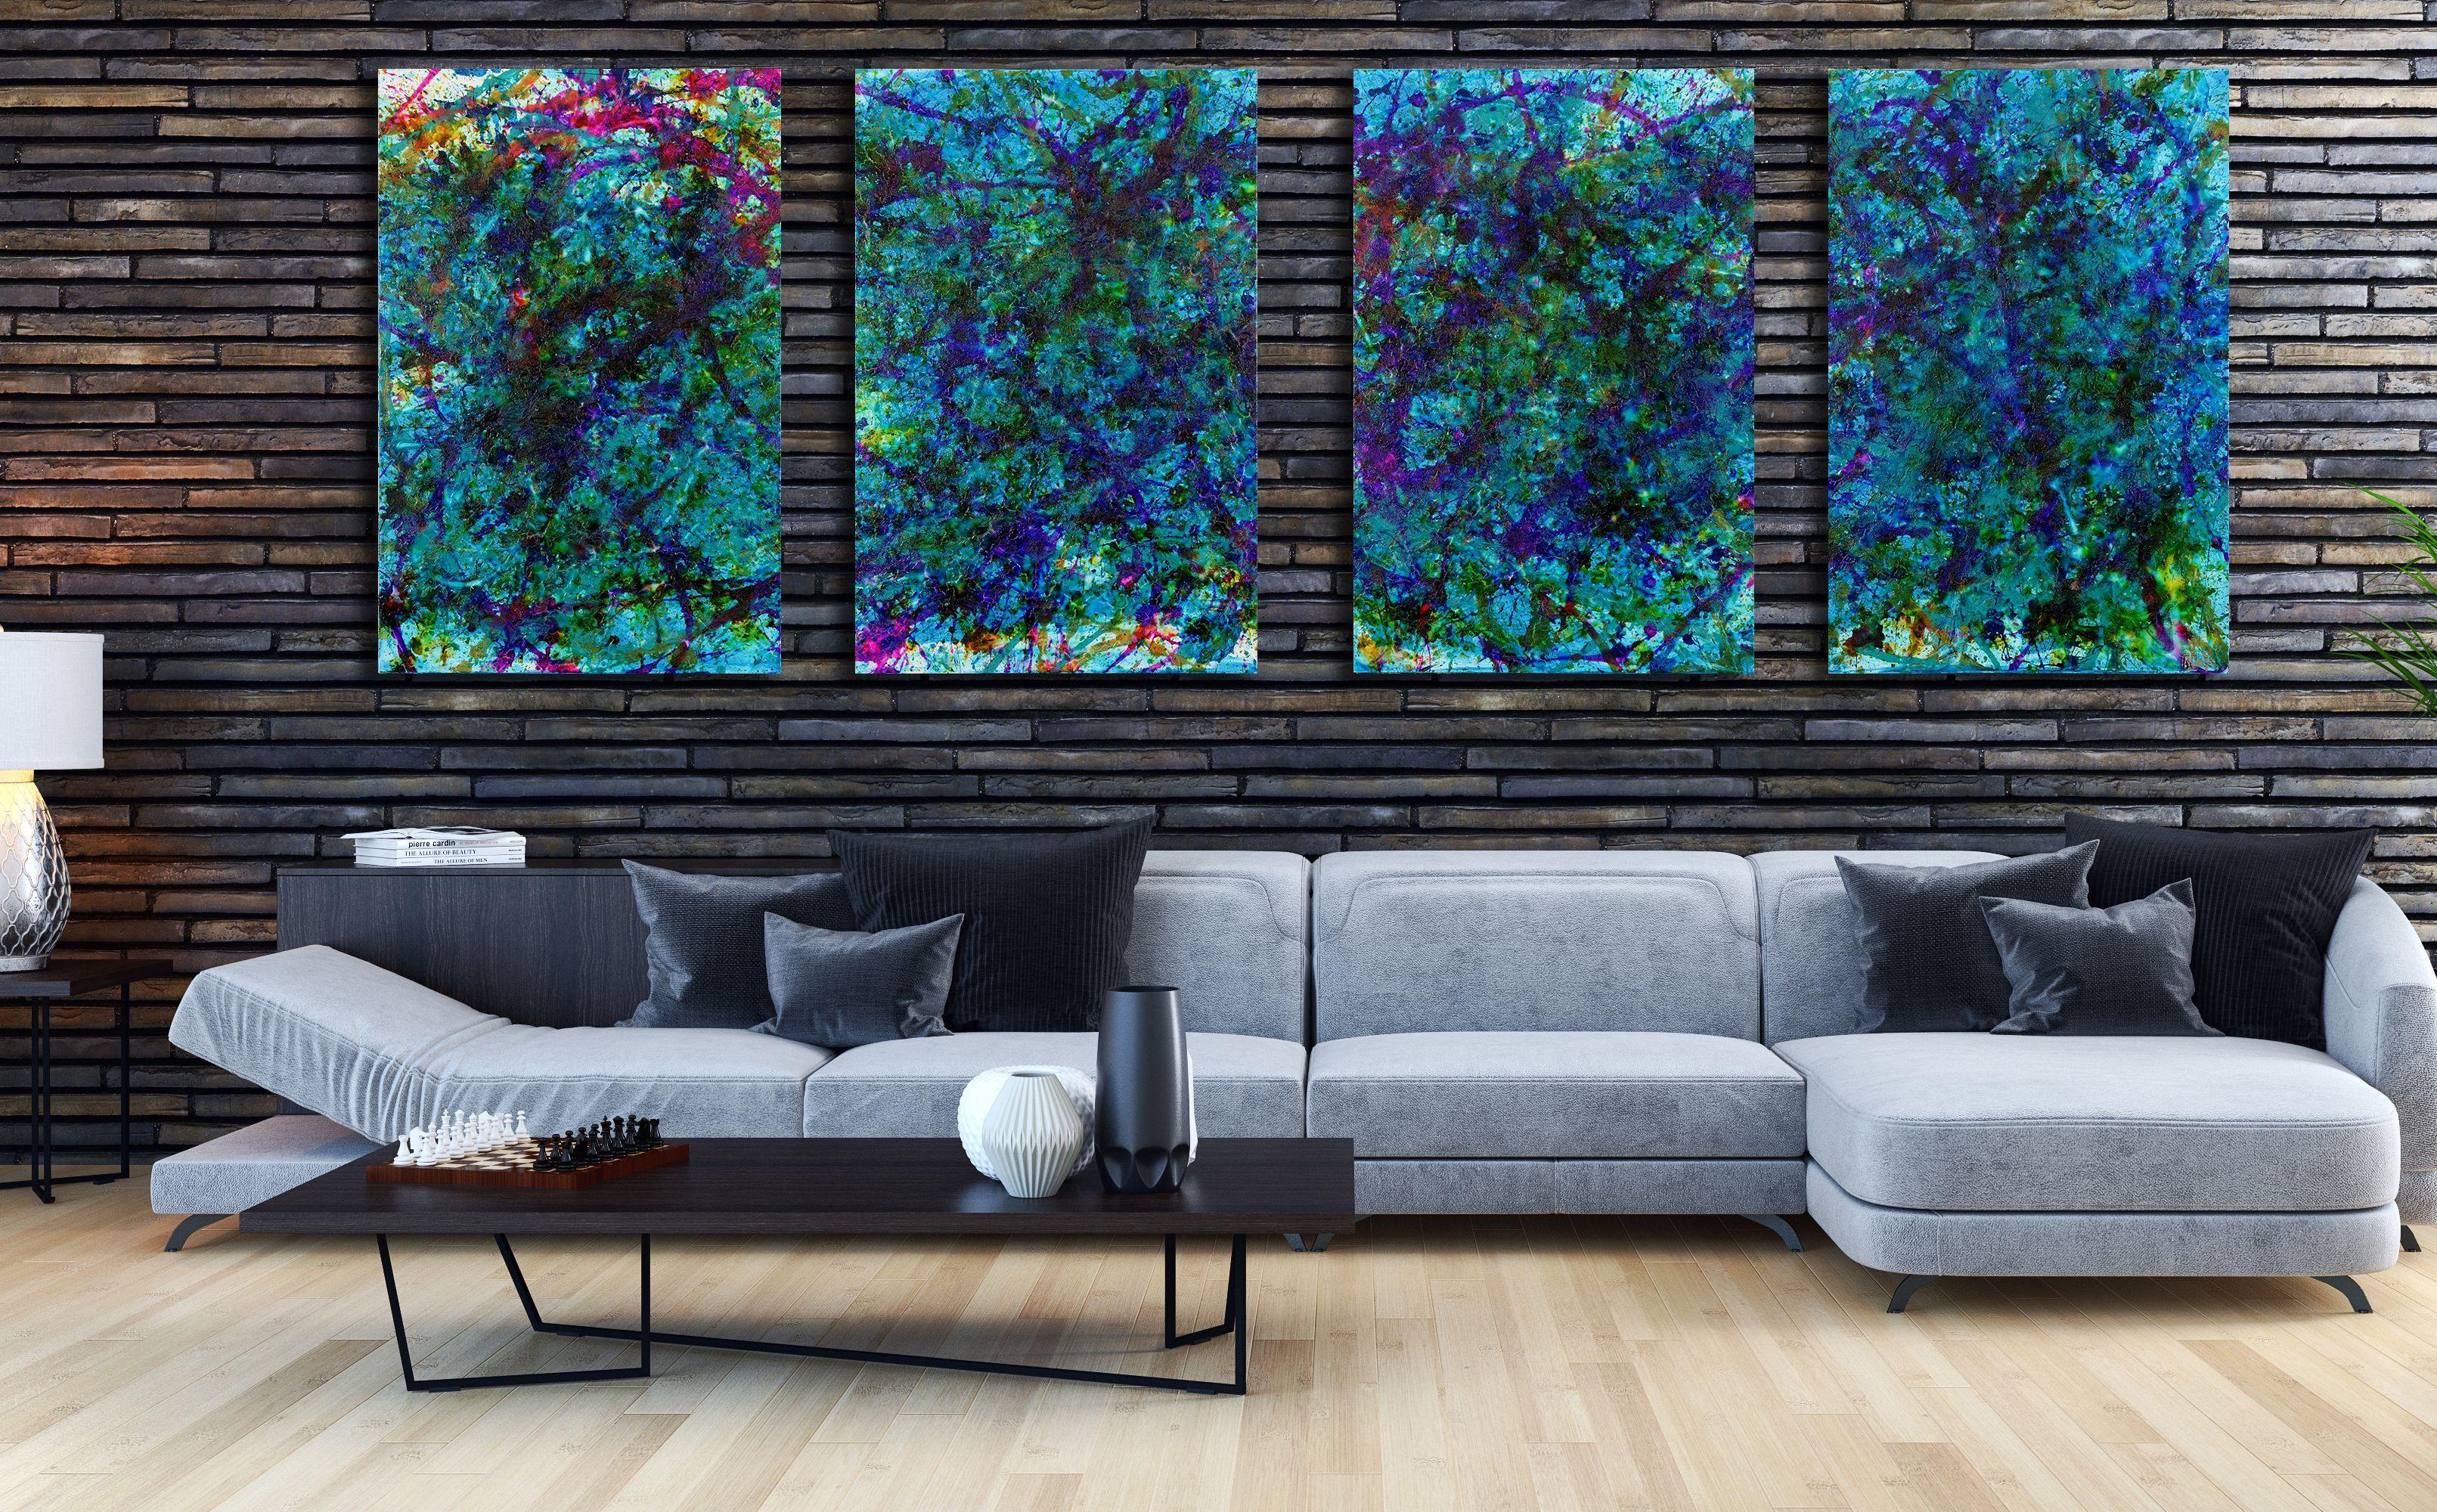 Vibrant and contemplative abstract mixed media painting consisting on 4 canvas 24 W x 36 H x 0.7 D in each one. Teal, iridescent orange, shades of blue, yellow, turquoise, clear gloss paint. This painting is very glossy can be displayed together or